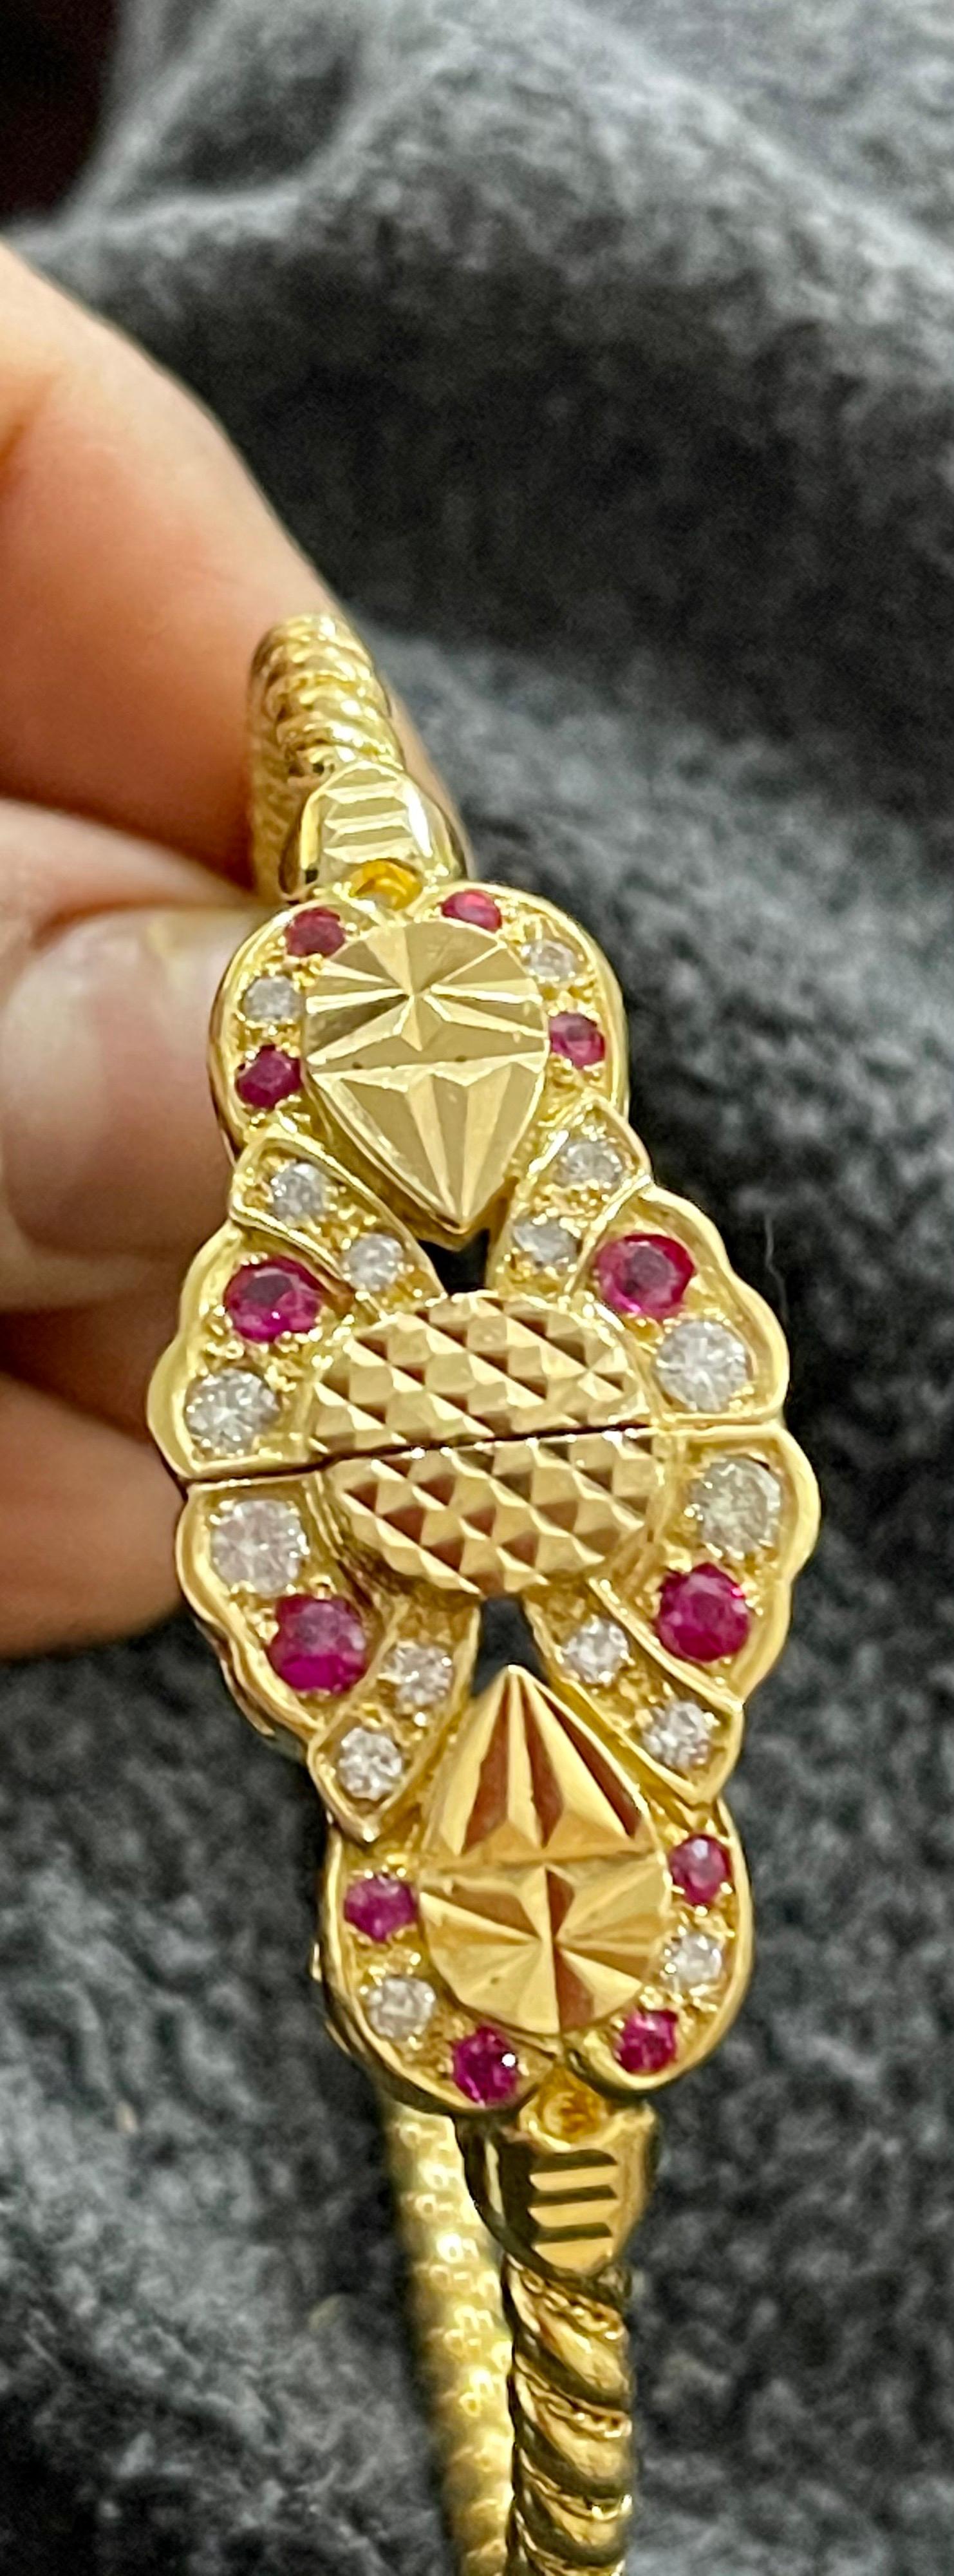 Ruby & Diamond  Bangle /Bracelet in 21 Karat Yellow Gold 34.6 Grams
It features a bangle style  Bracelet crafted from an 21 Karat  Yellow gold and embedded with   12 round Rubies weighting approximately 0.7 Carat
 There are  16 Round diamonds and it